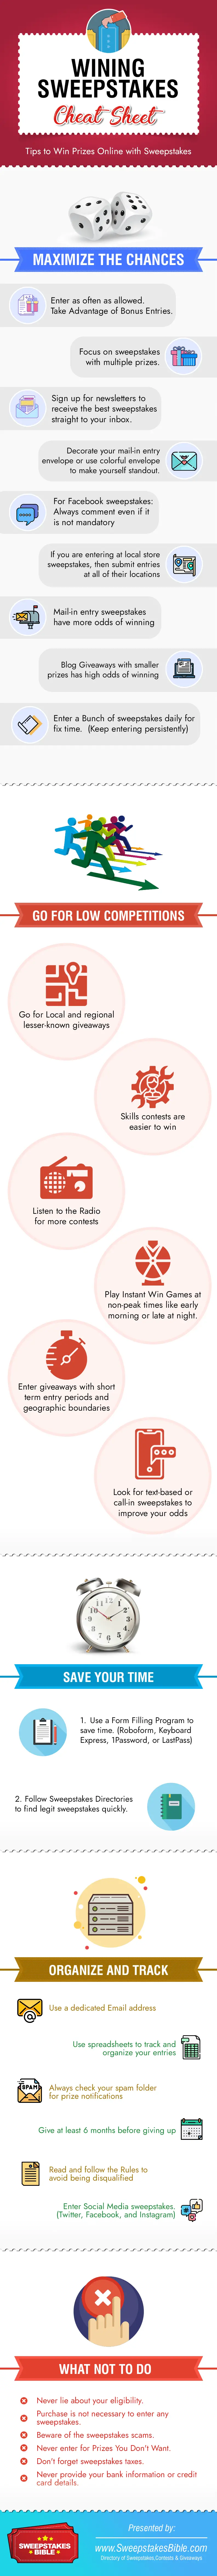 win sweepstakes tips and tricks